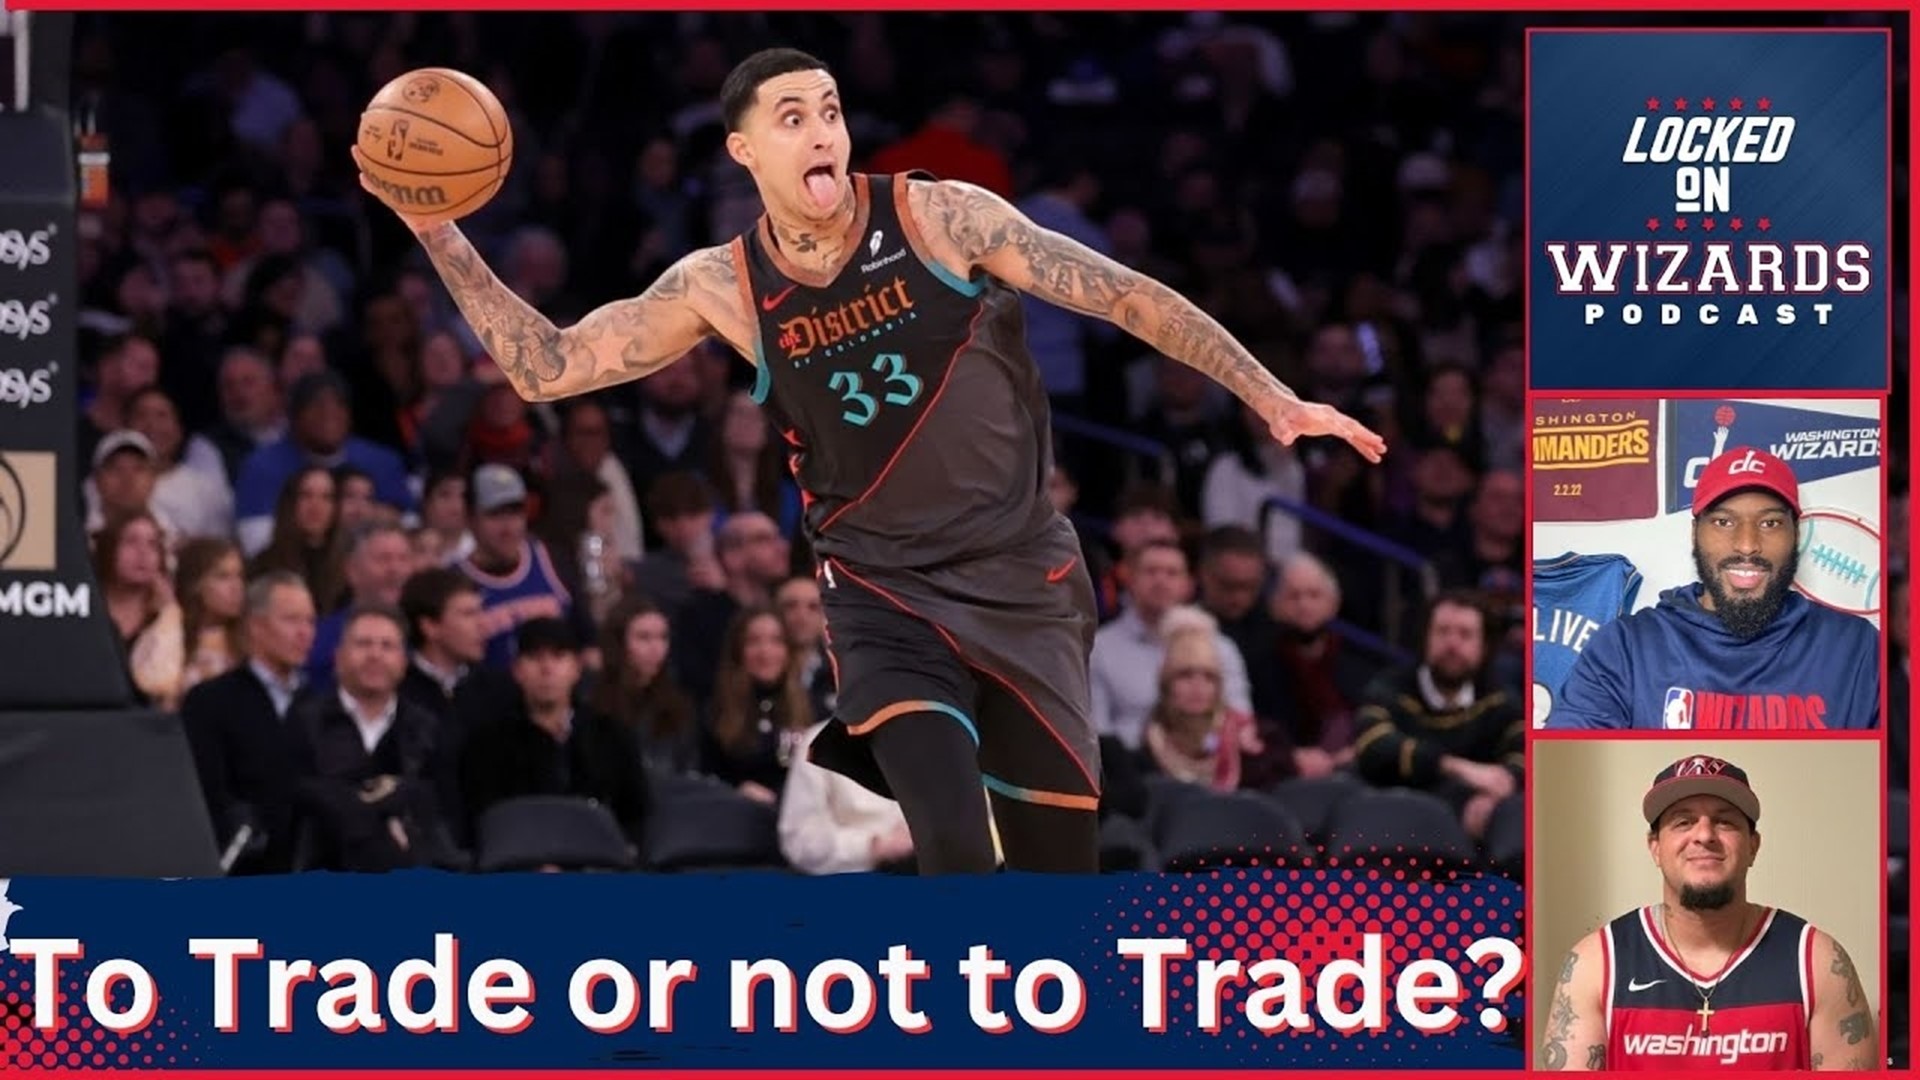 Ed and Brandon debate whether the Wizards are asking too much in return for Kyle Kuzma on the trade market.